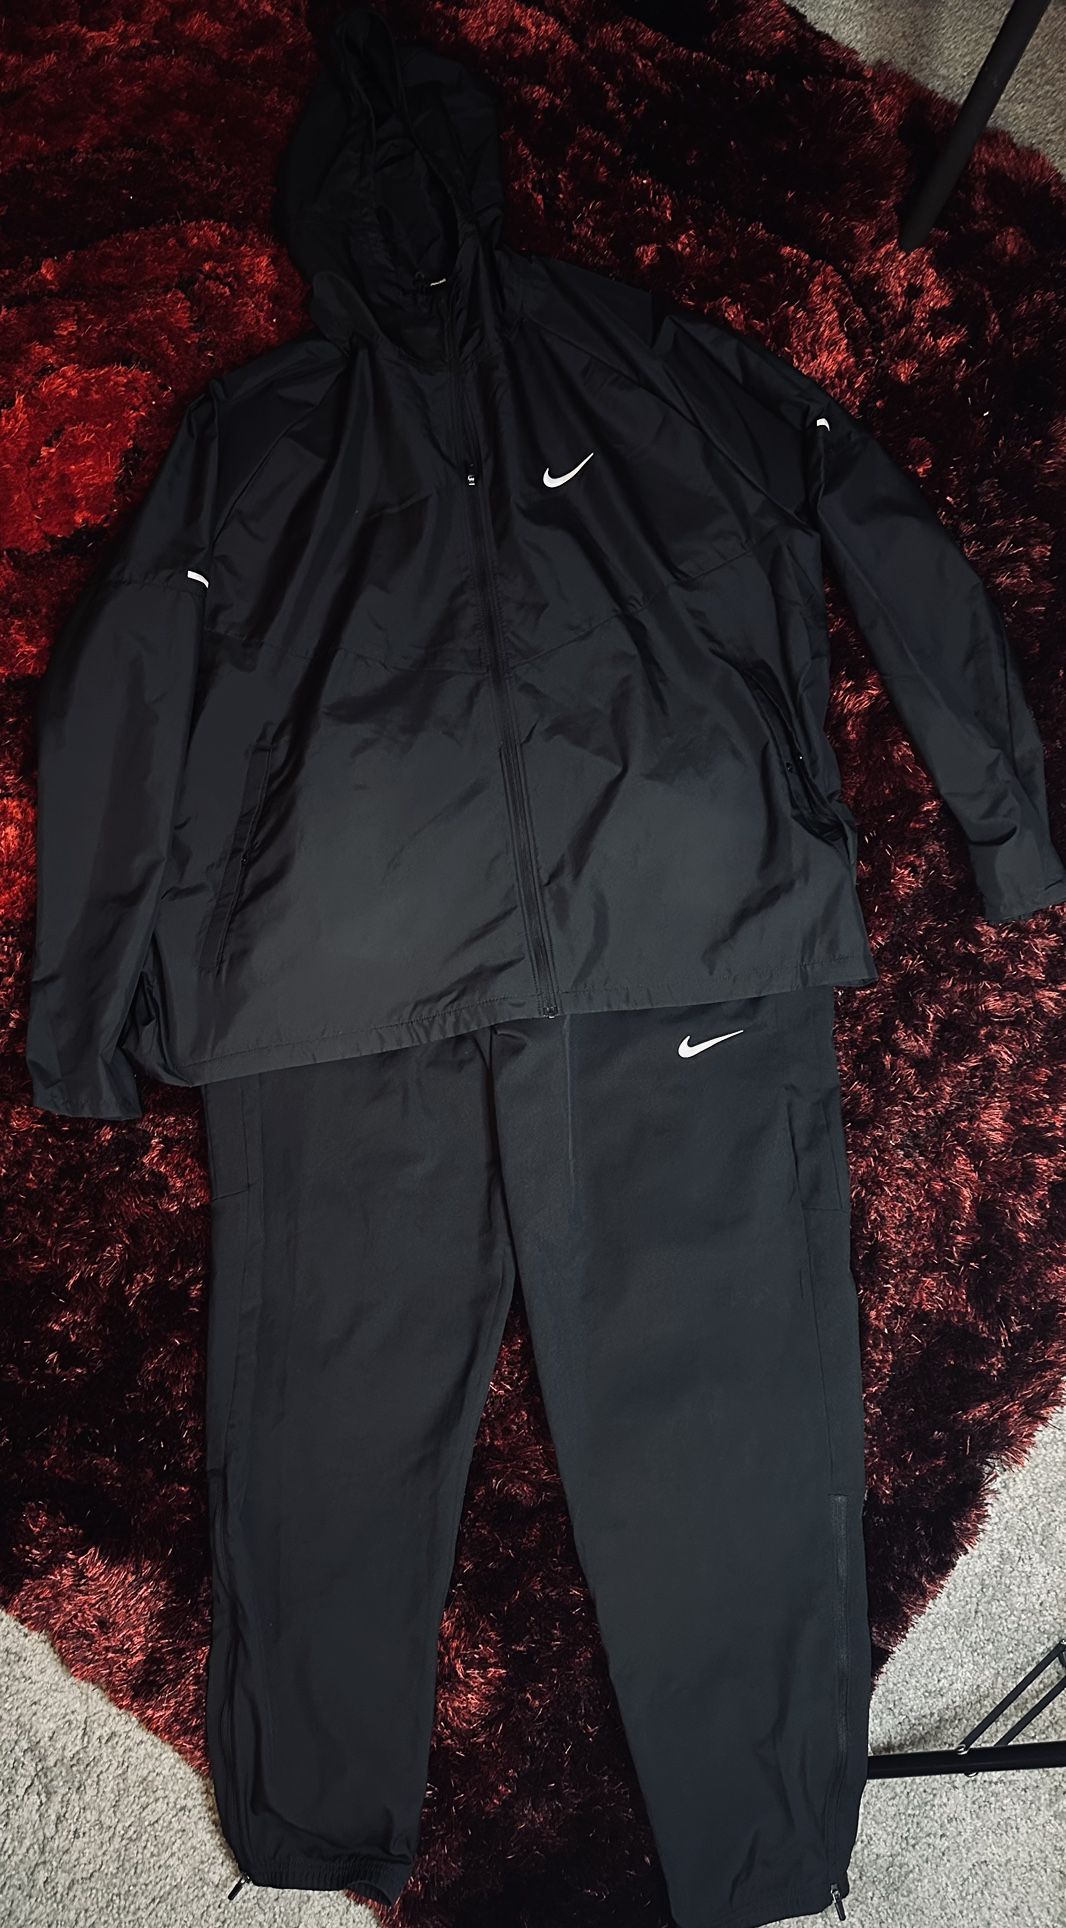 Nike Outfit Bundle 